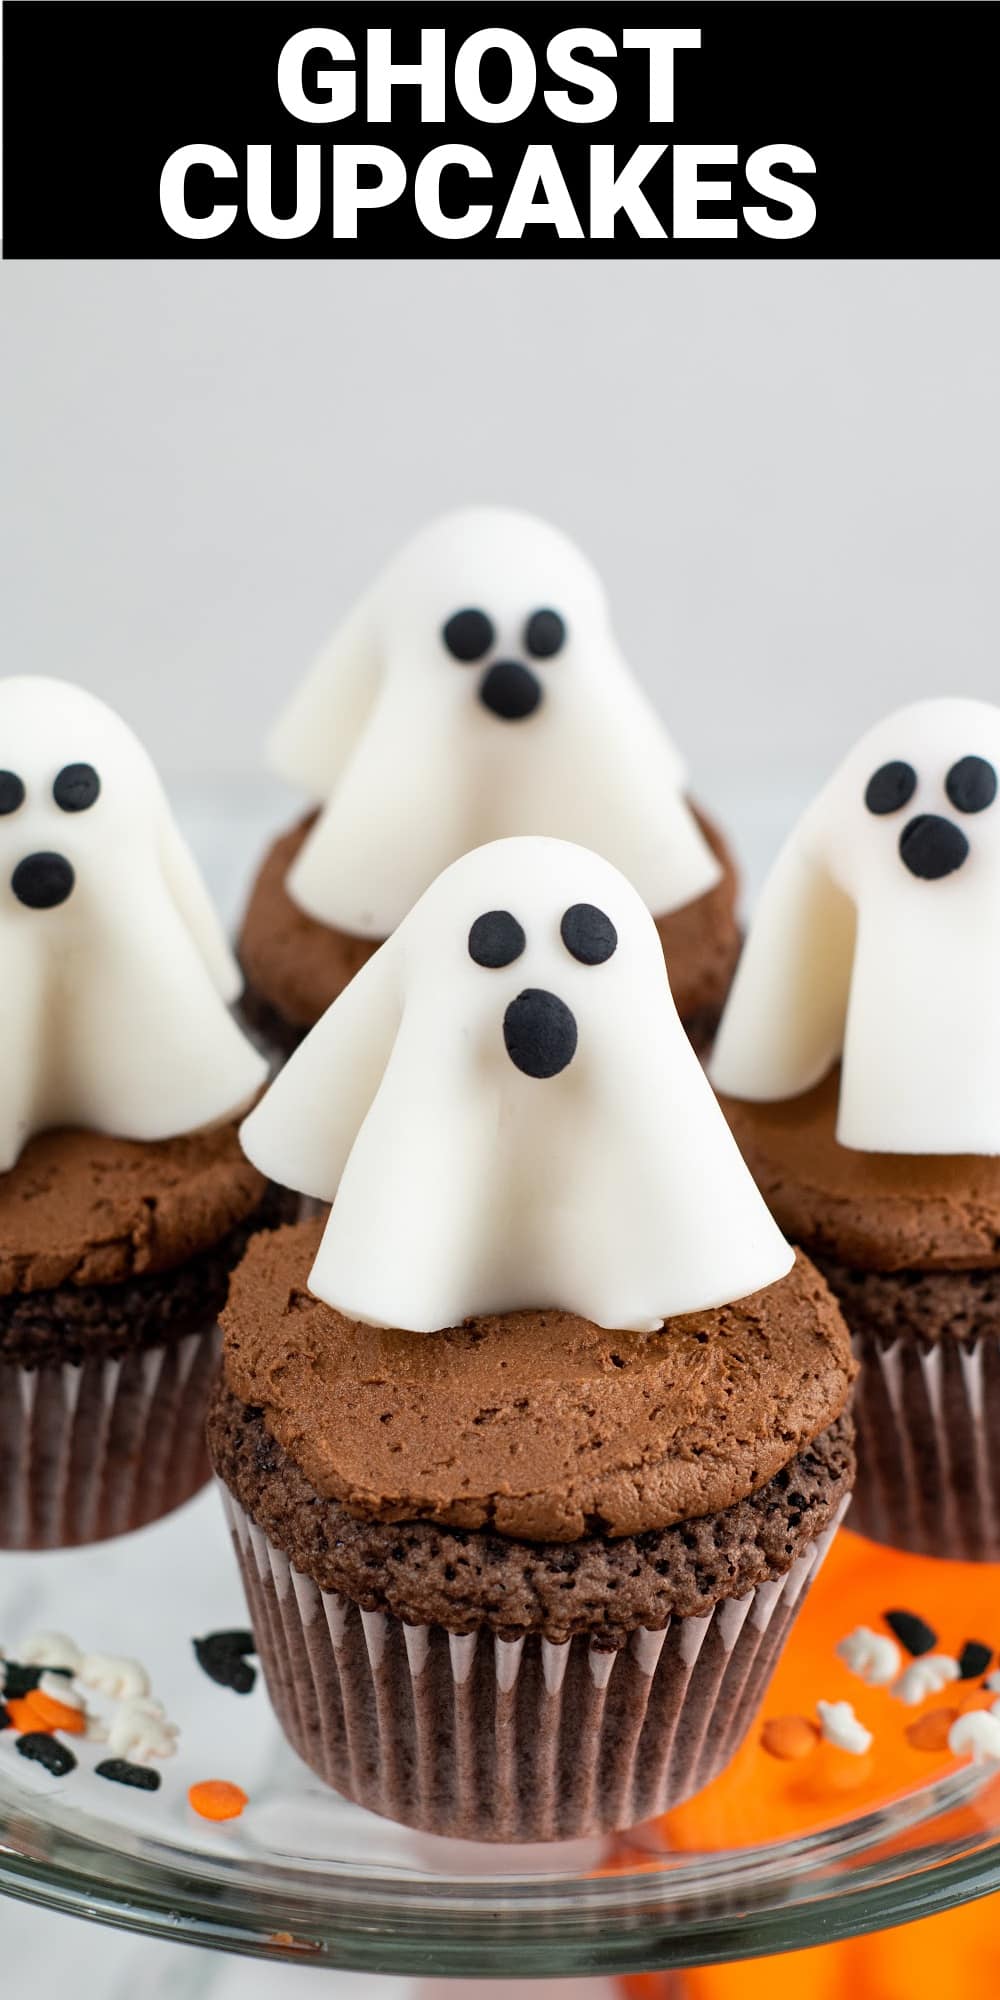 These ghost cupcakes are a fun and spooky treat that the whole family will love. Your choice of cupcakes are topped with adorable ghost toppers that are created from fondant and lollipops. Delicious and festive, they’ll be perfect for all of your Halloween events and parties. 